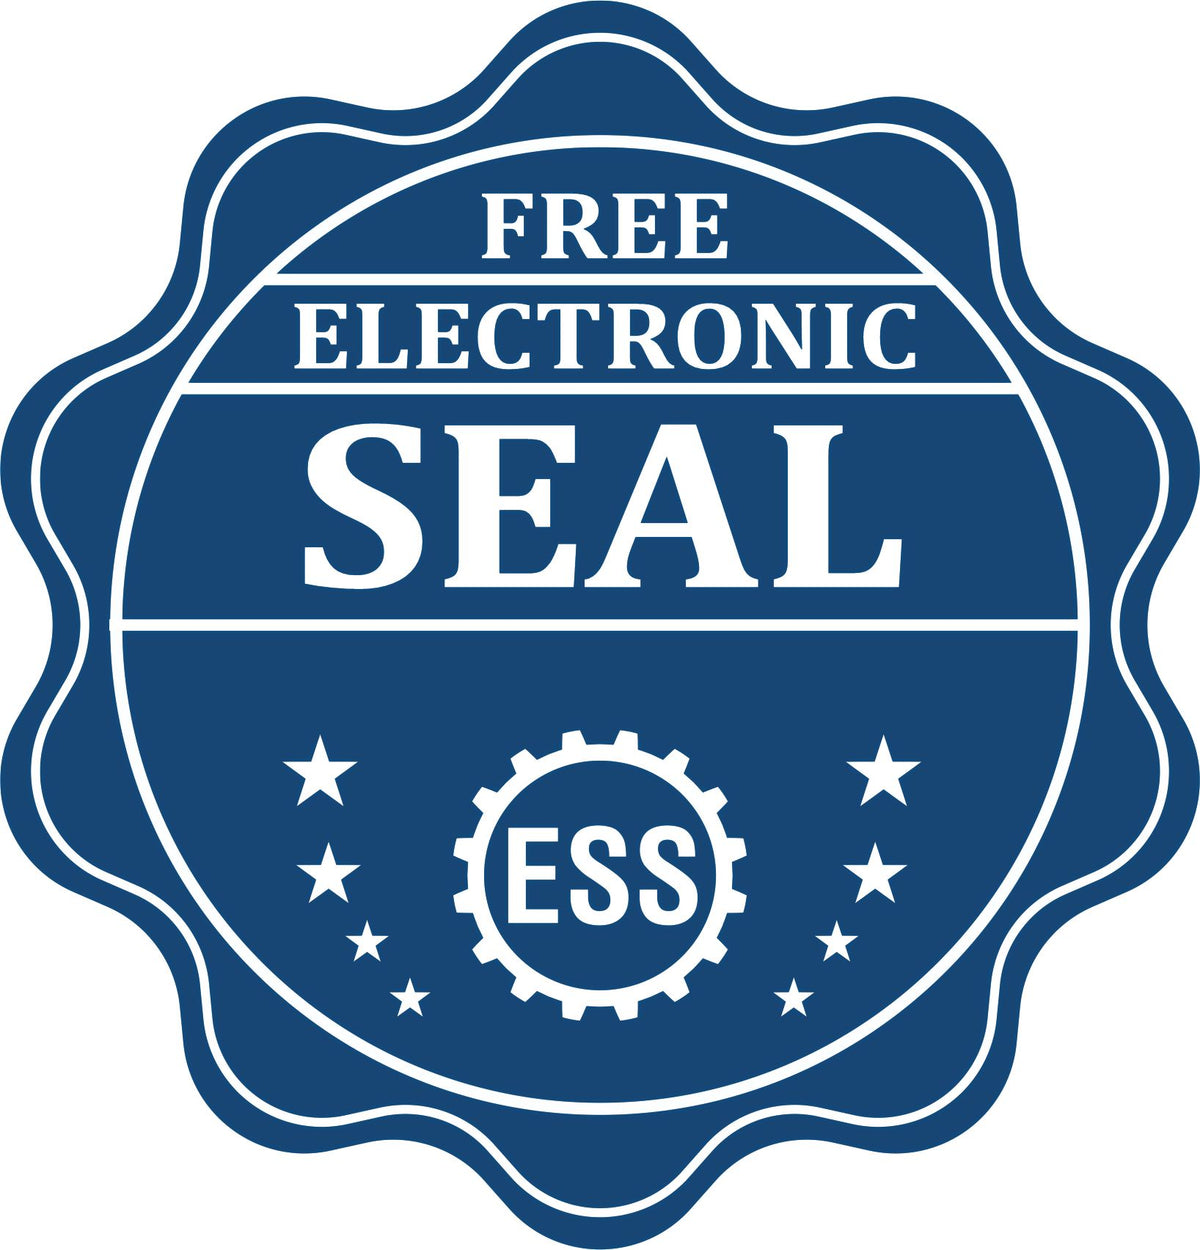 A badge showing a free electronic seal for the Long Reach Wyoming PE Seal with stars and the ESS gear on the emblem.